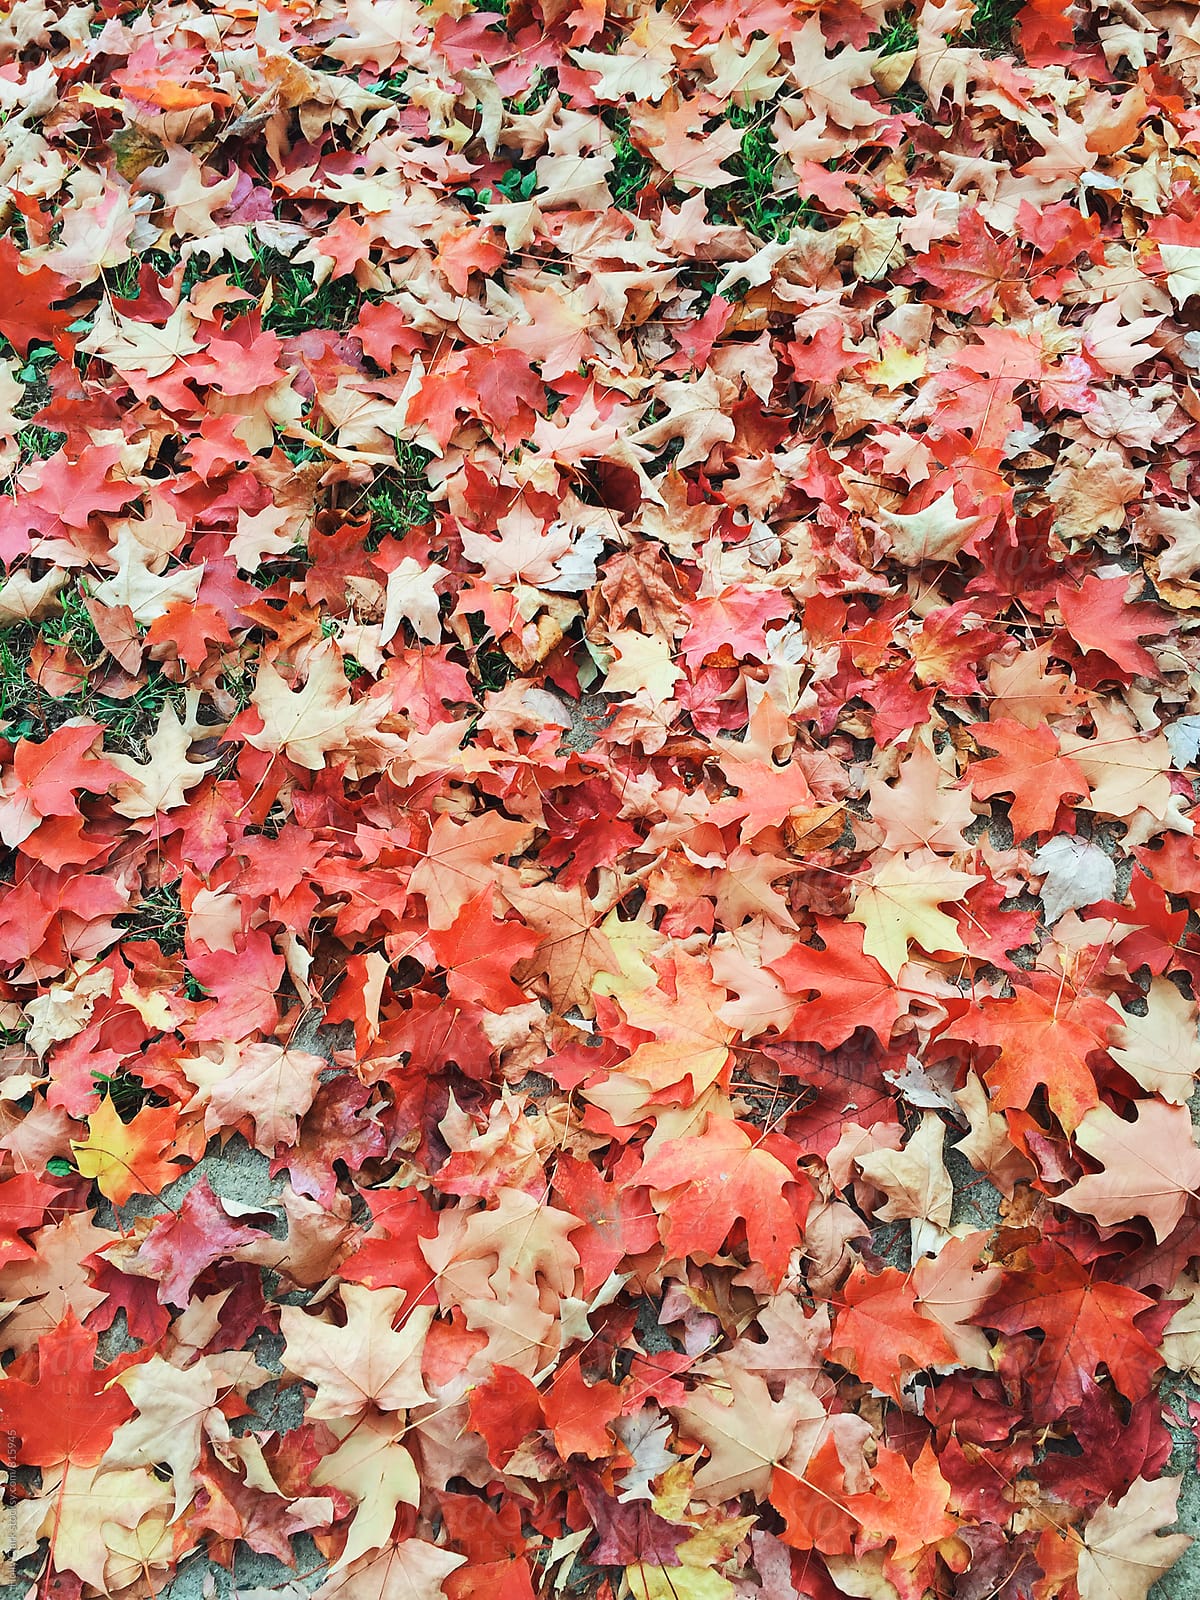 Colorful autumn leaves scattered on the ground